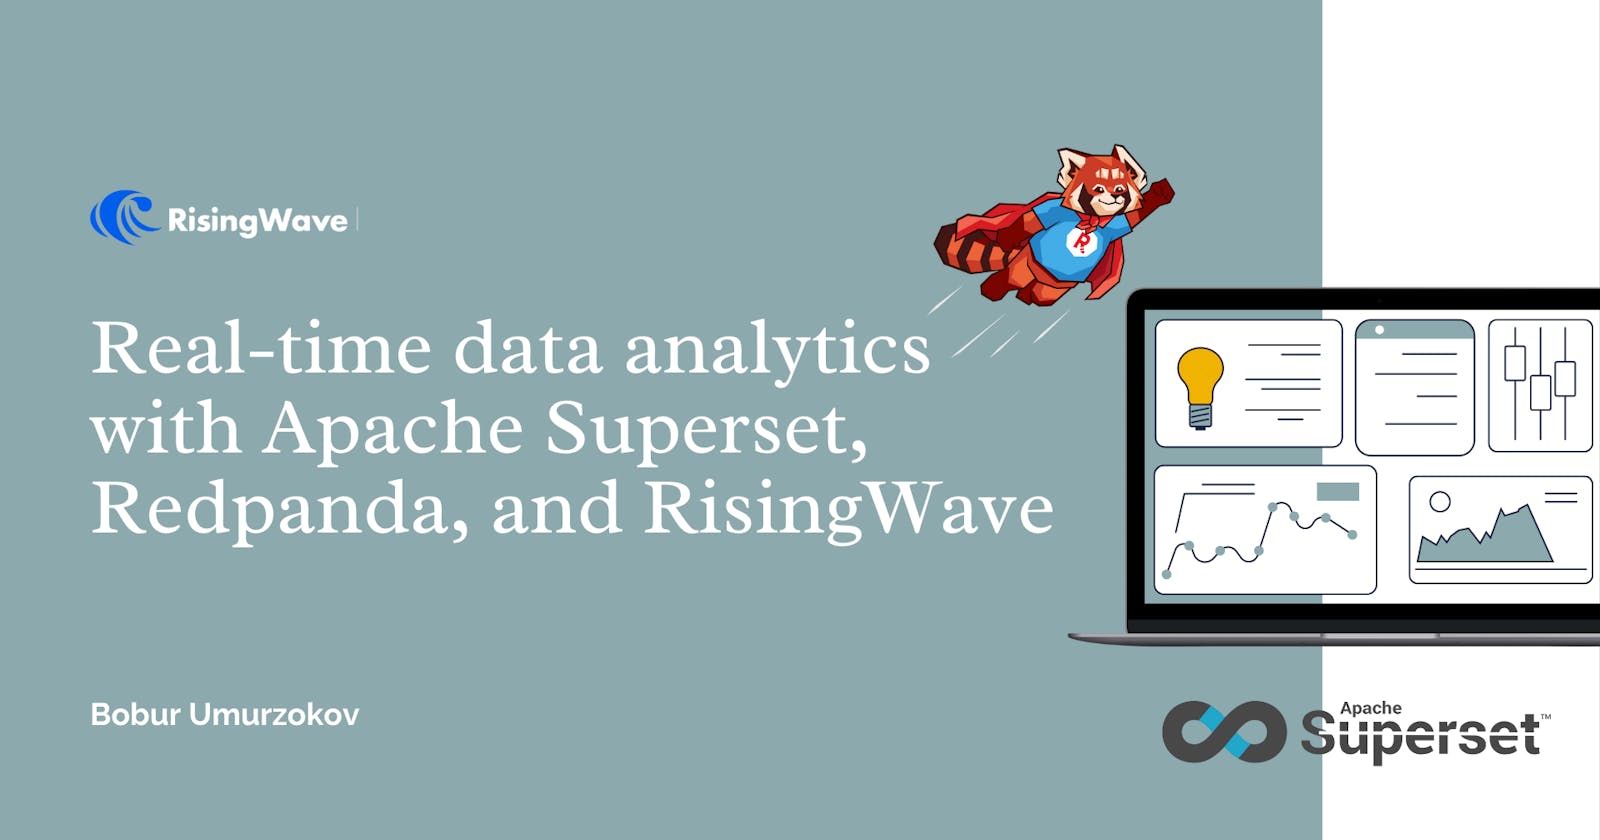 Real-time data analytics with Apache Superset, Redpanda, and RisingWave